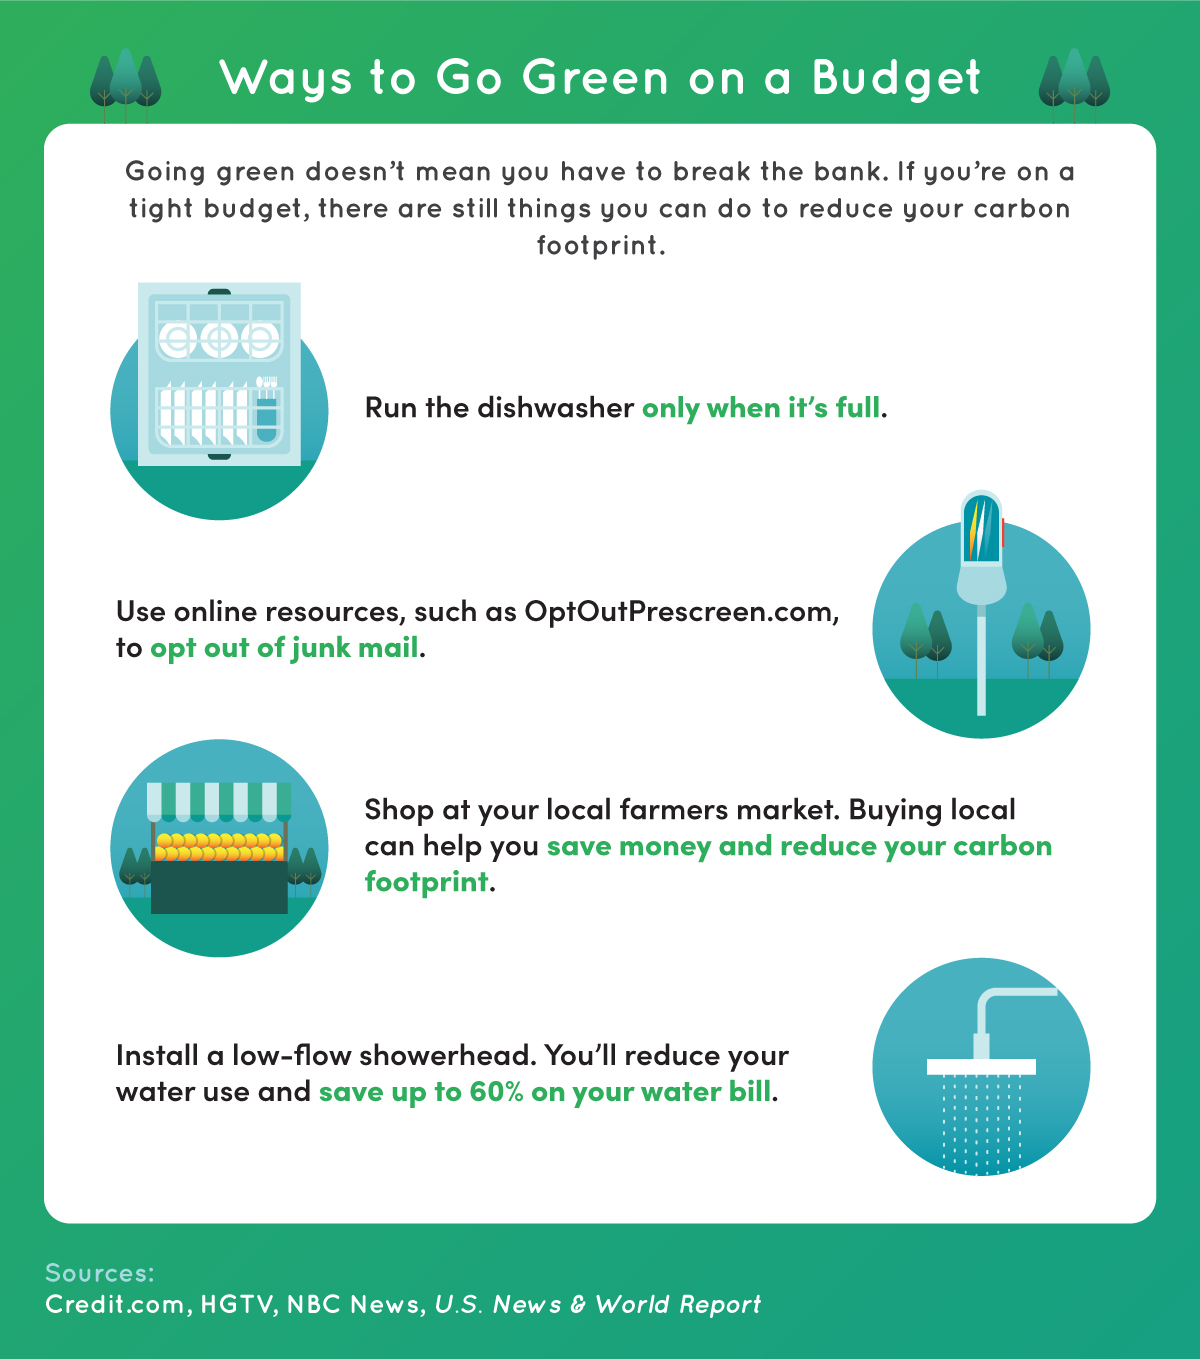 Ways to go green on a budget include running the dishwasher only when it’s full and shopping at a local farmers market.